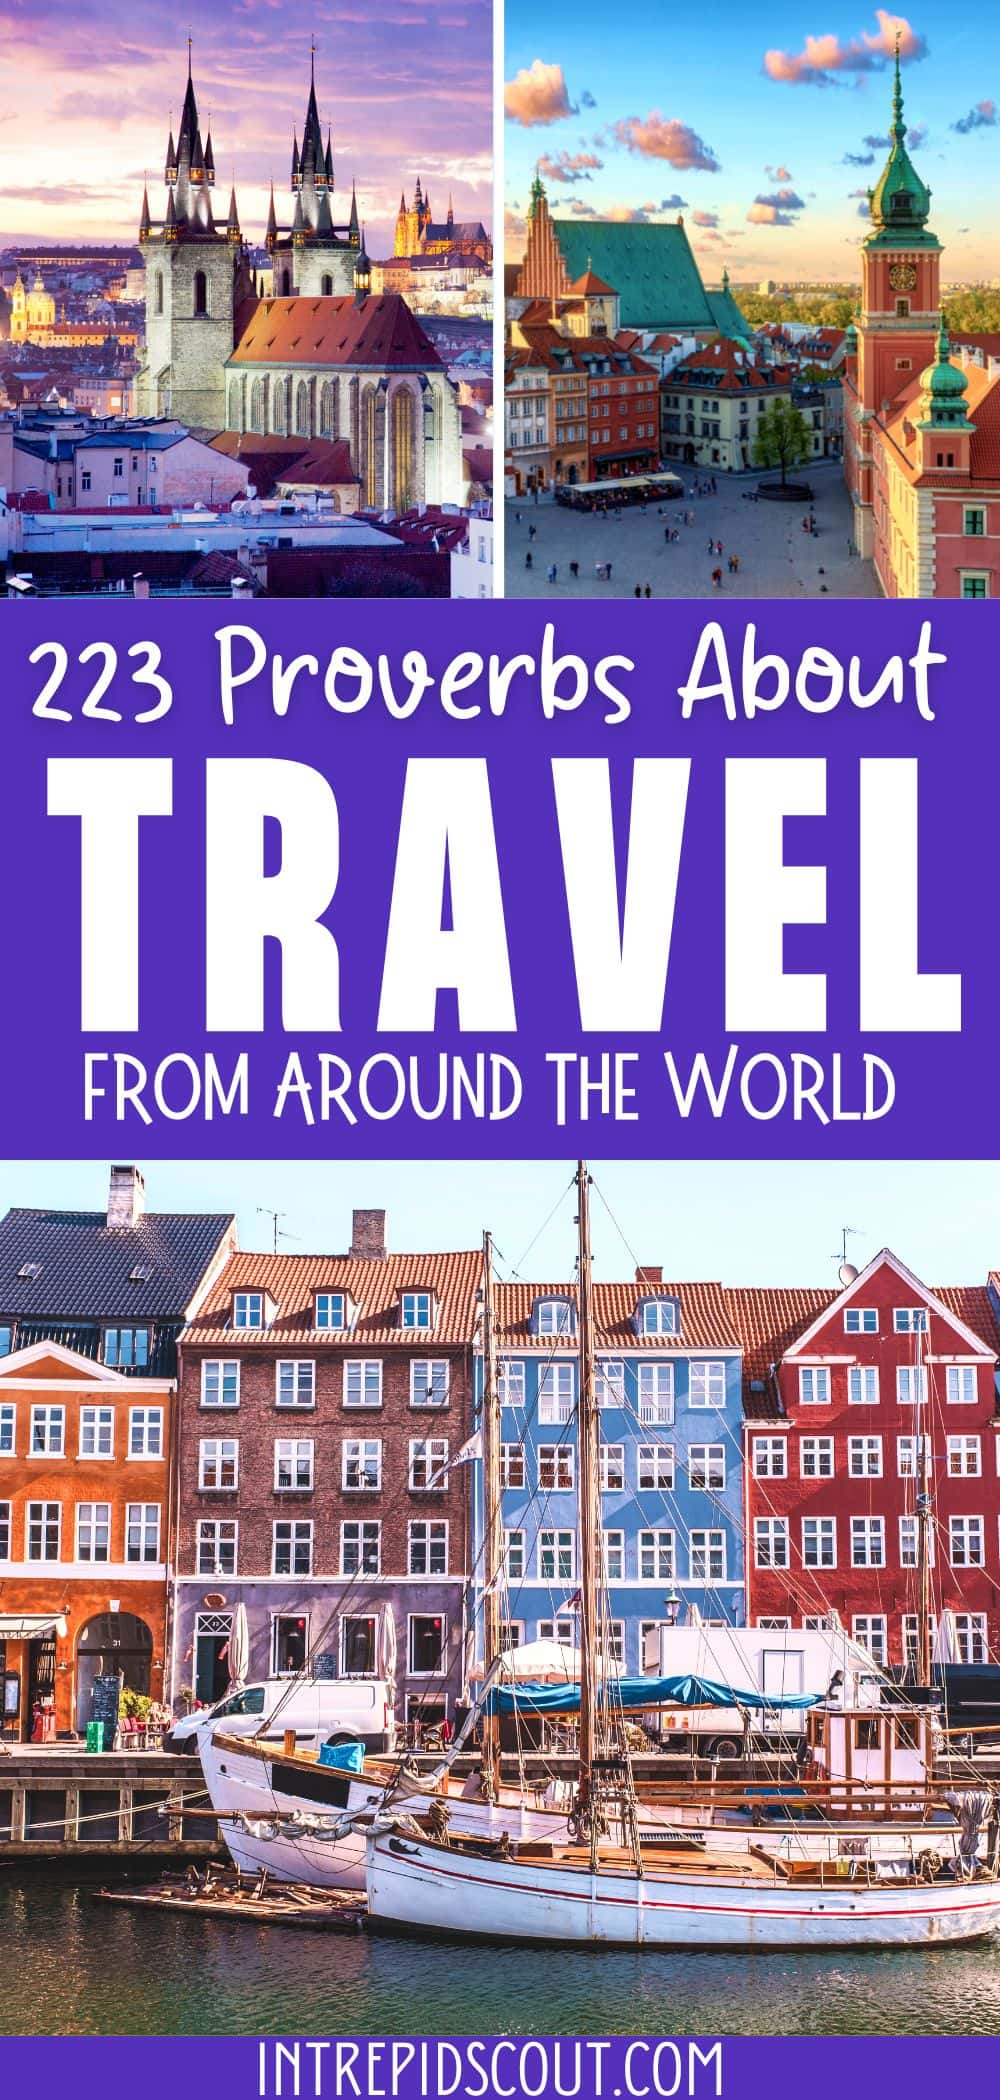 Proverbs About Travel